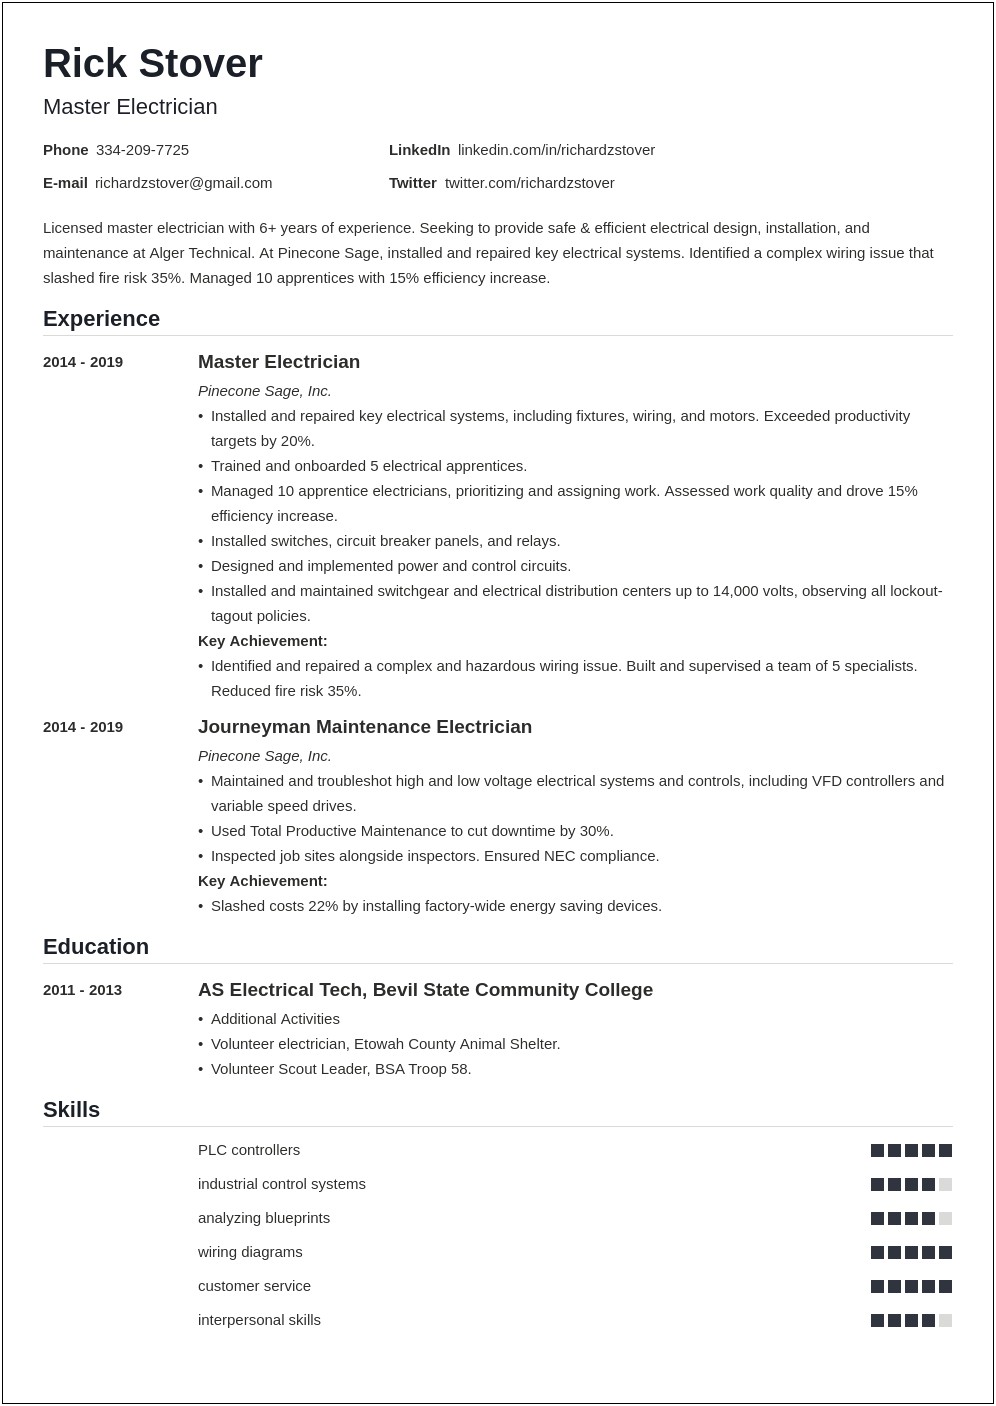 Resume Objective For Electrician Journeyman